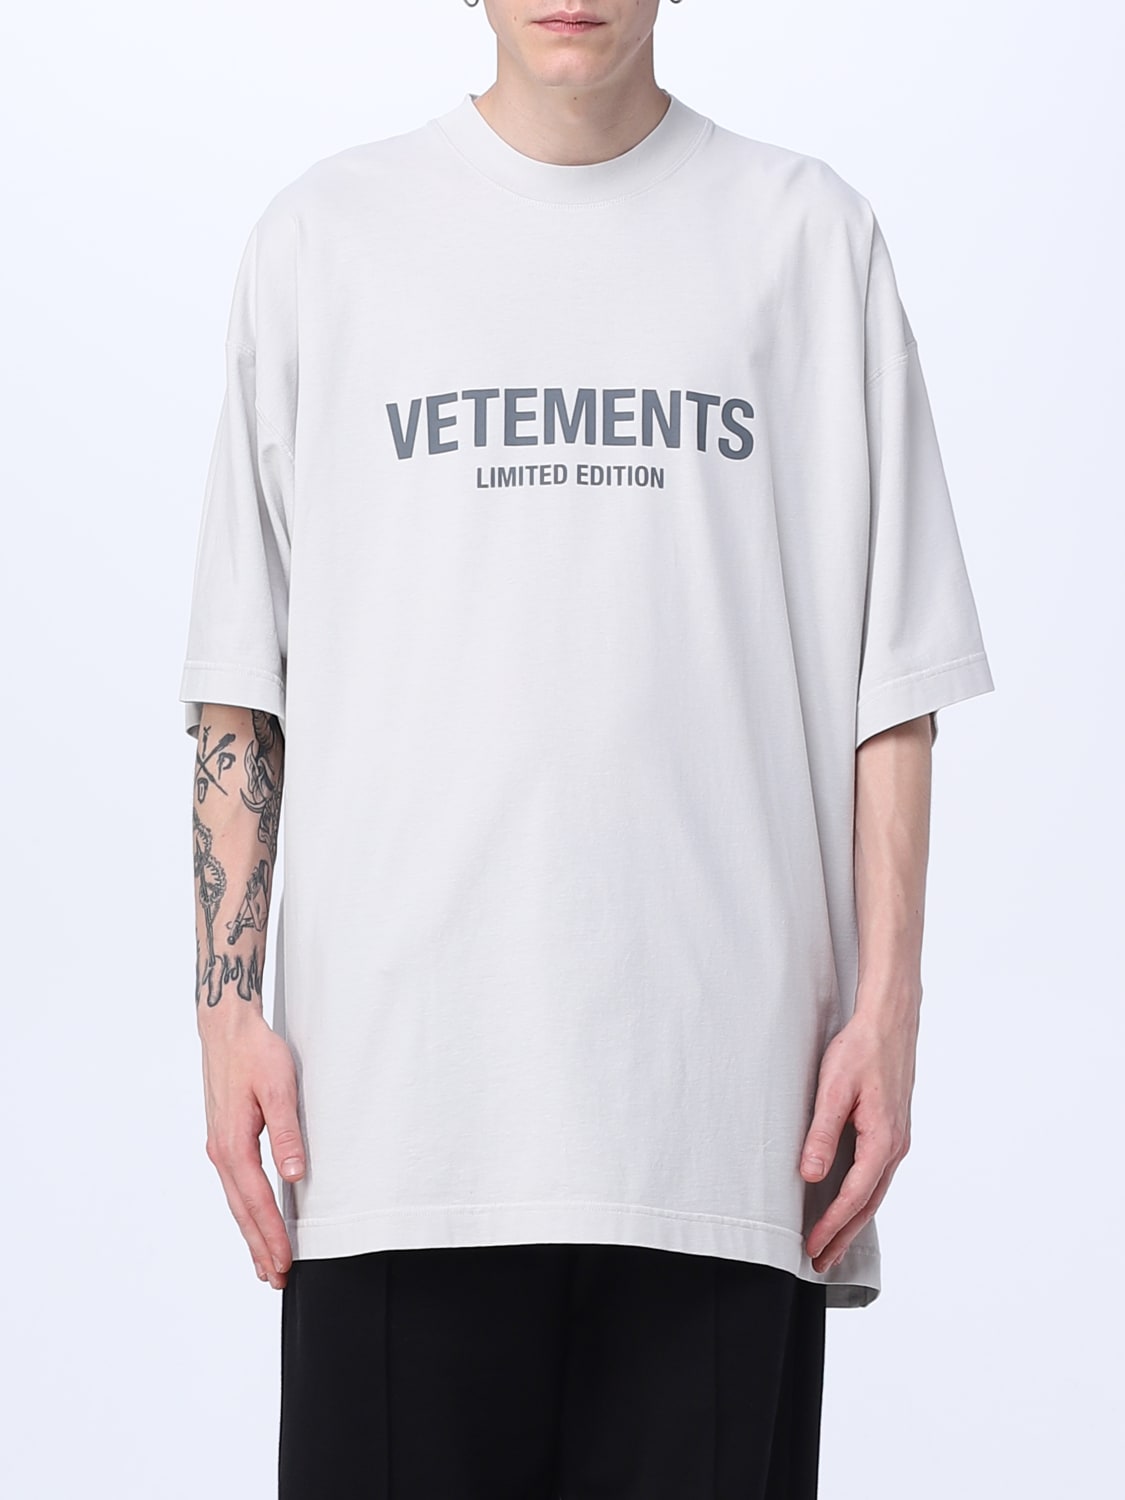 VETEMENTS T-shirt Tシャツ☆ | camillevieraservices.com